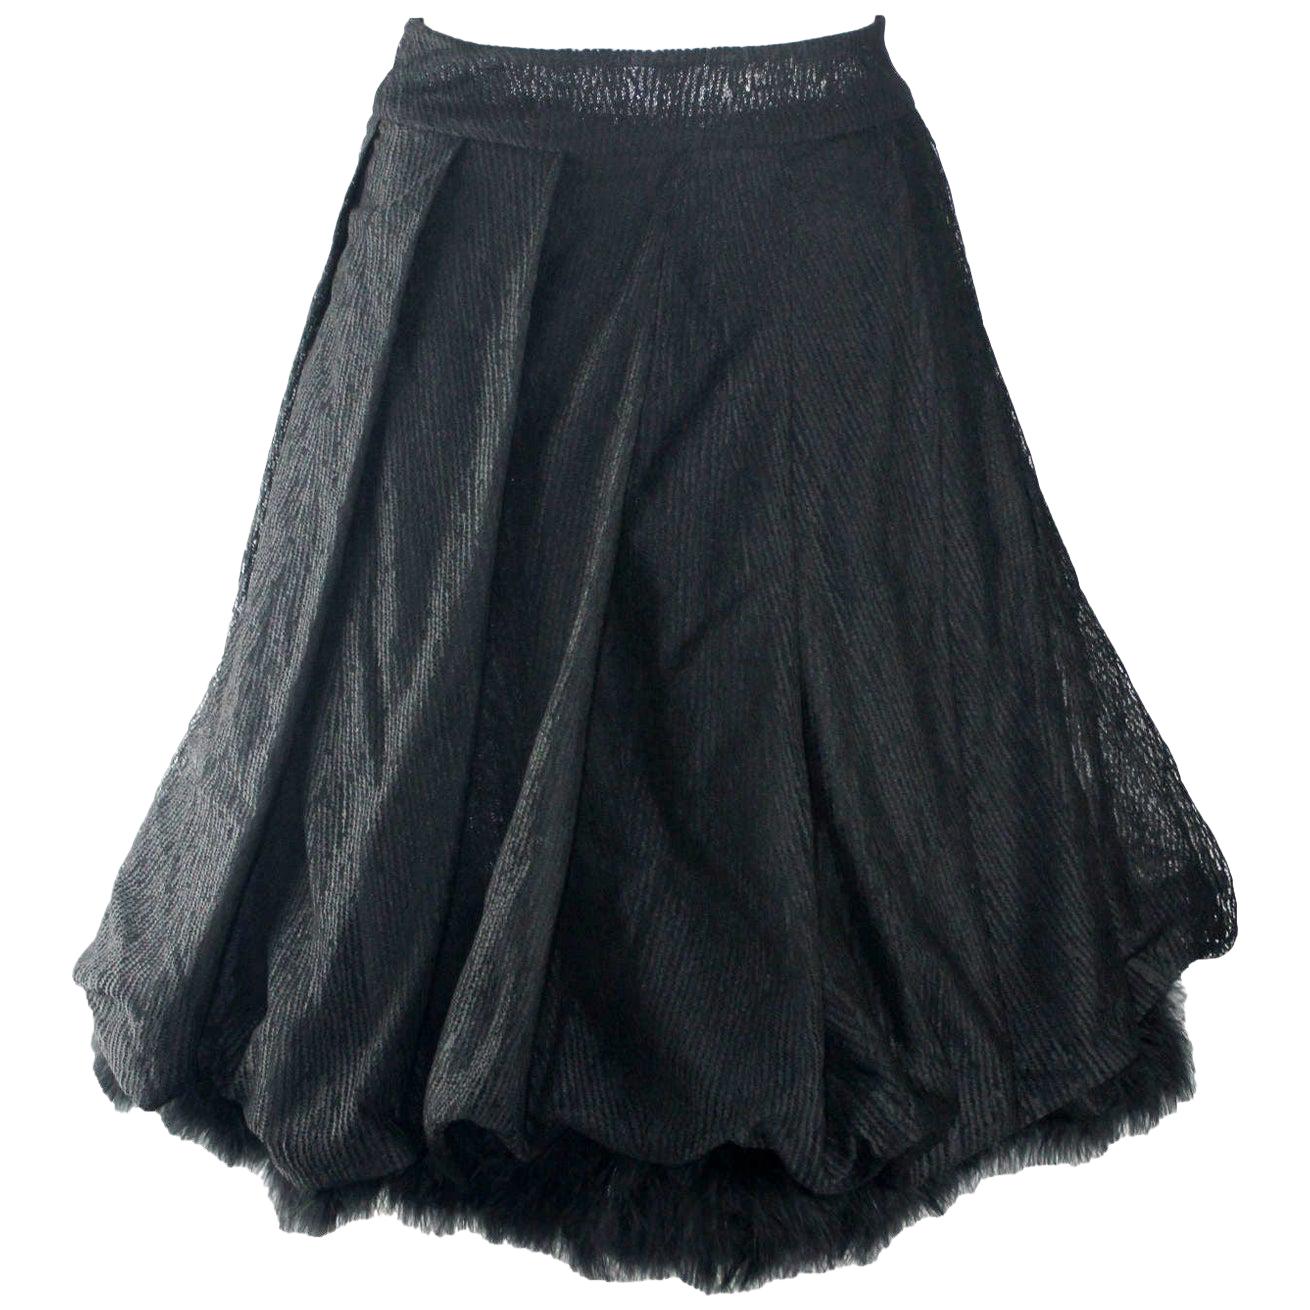 Unique Piece - CHANEL Mesh & Tulle Evening Skirt with Feather Trimming